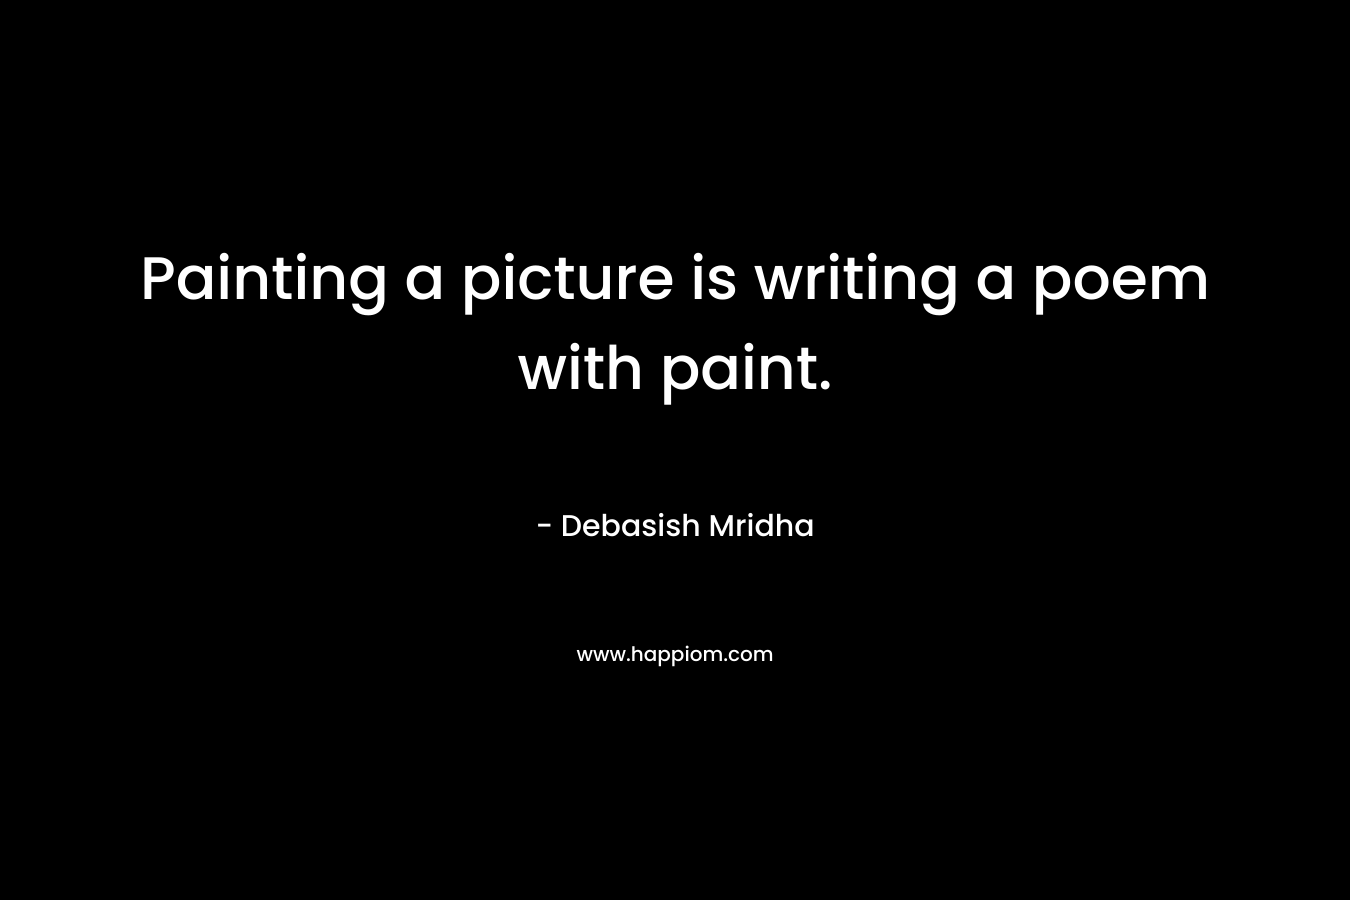 Painting a picture is writing a poem with paint.